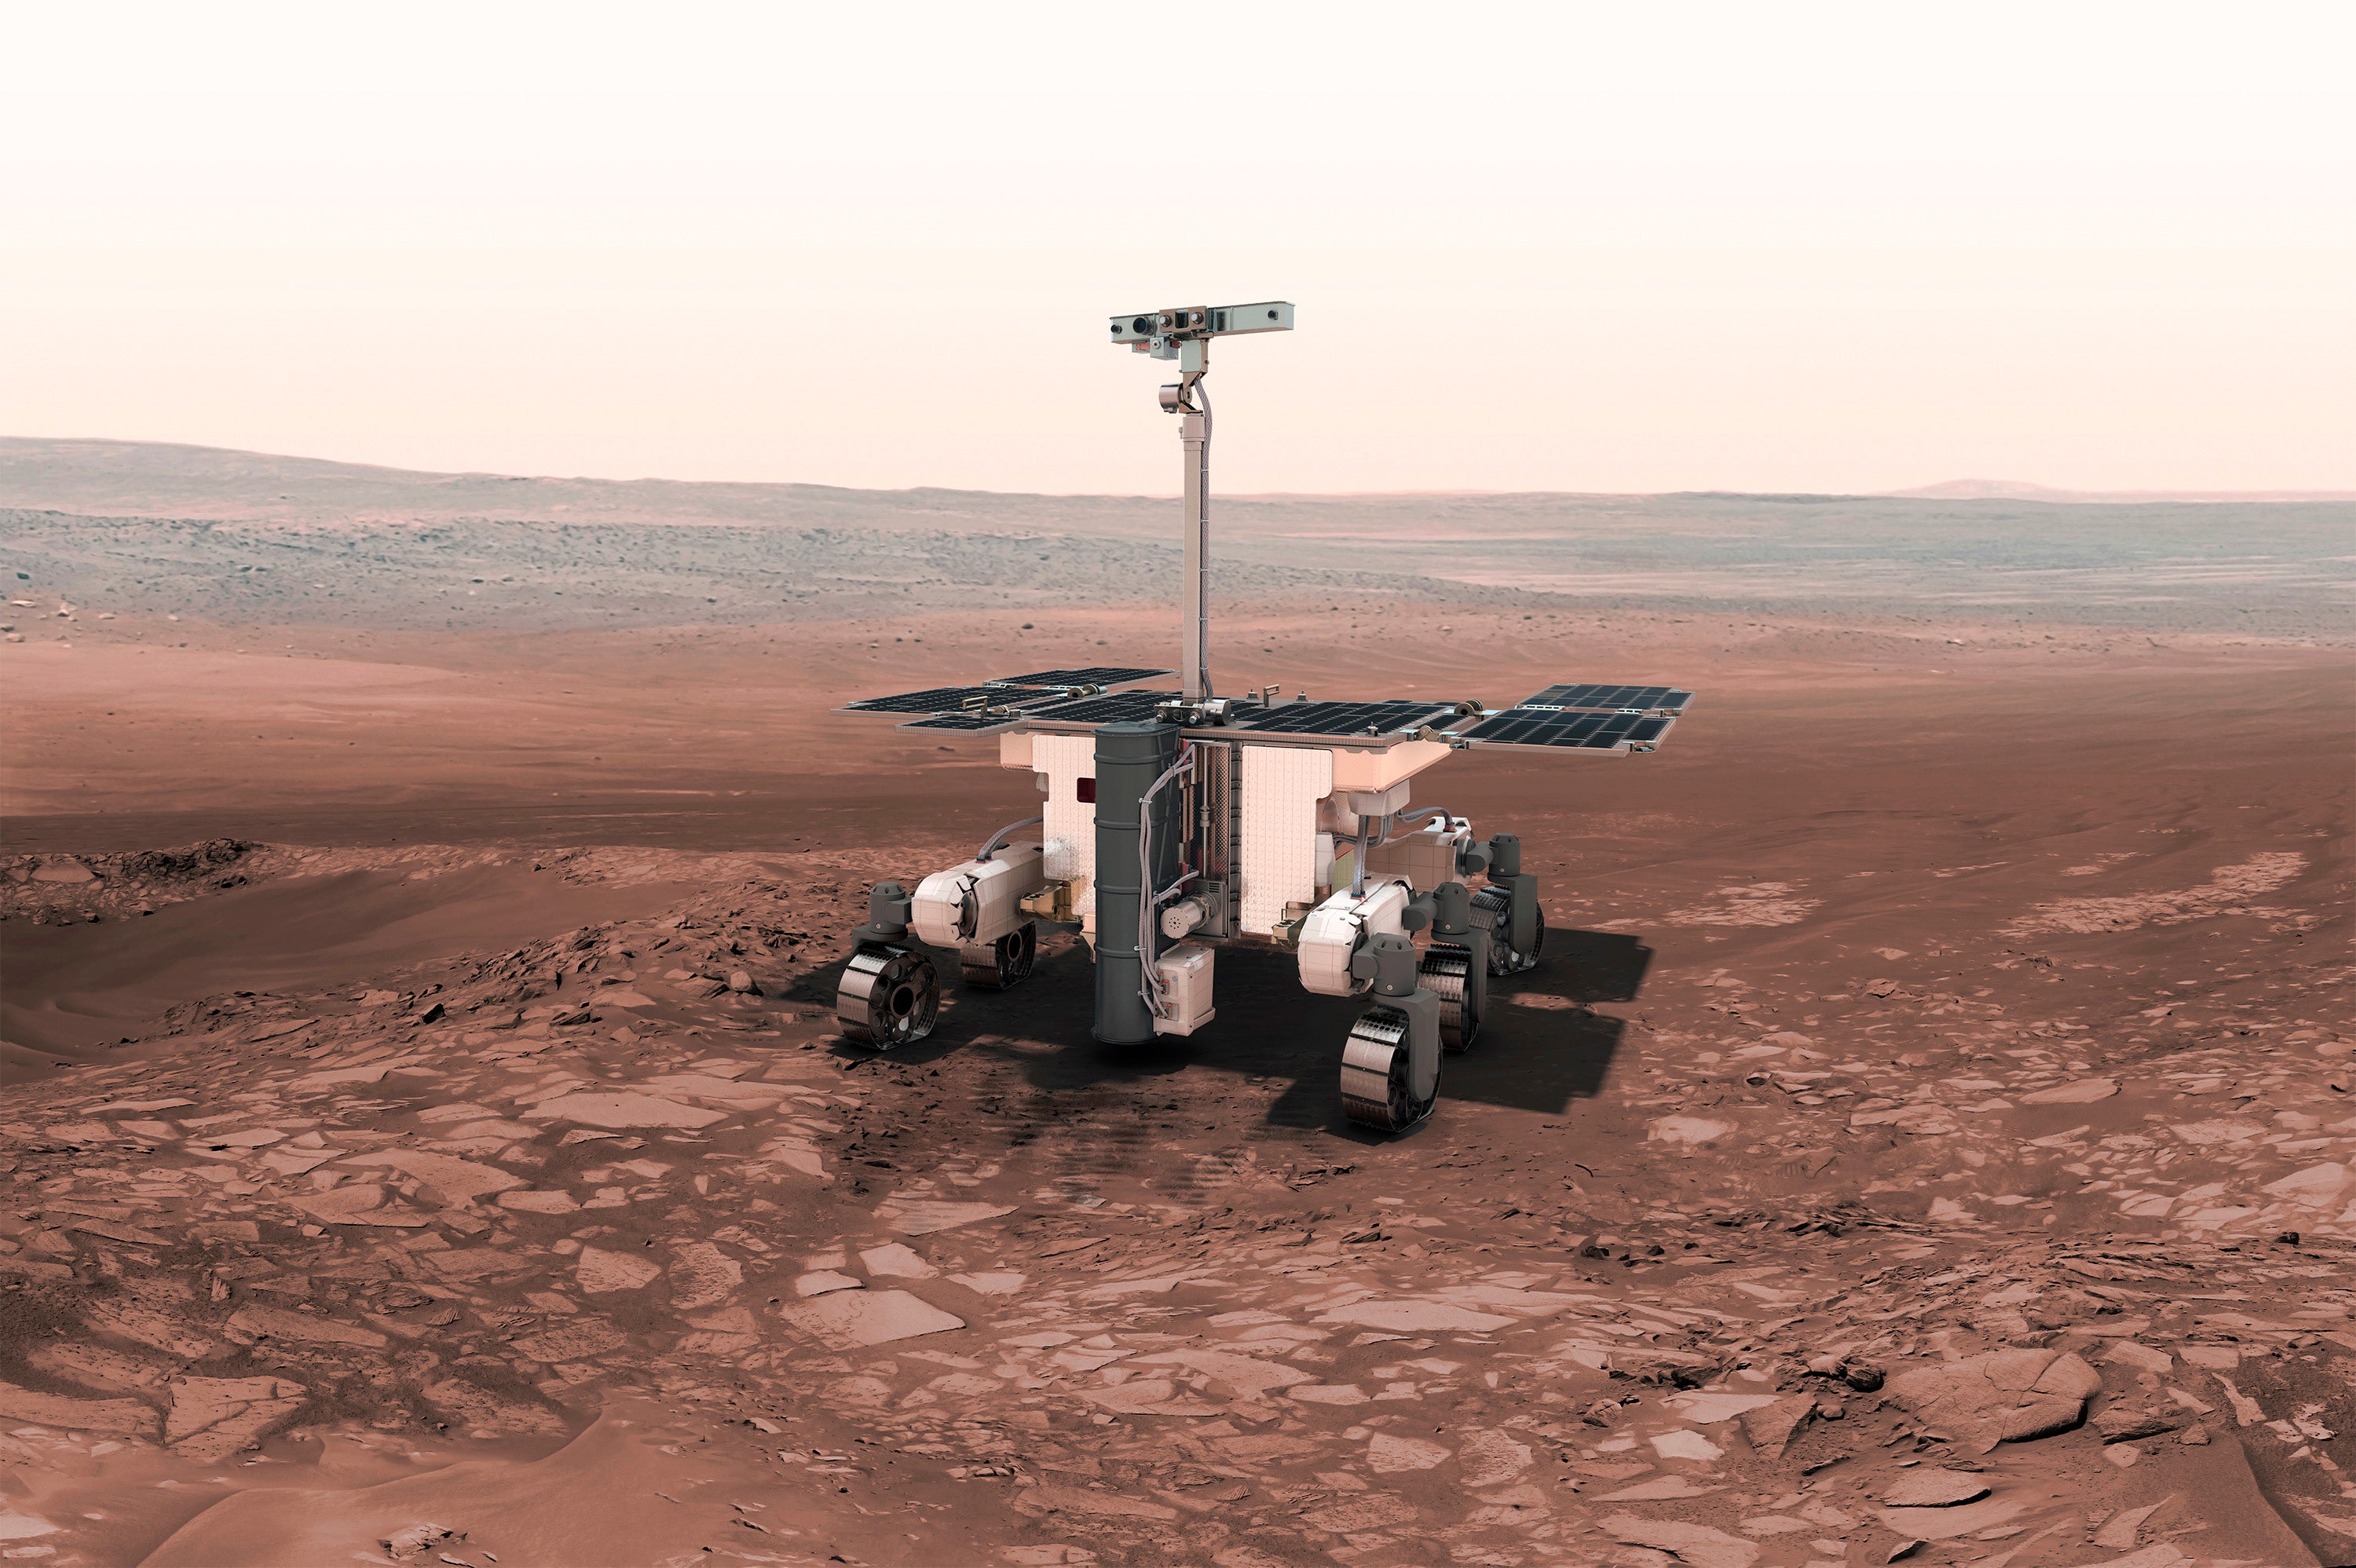 The “ExoMars” Europe-Russia Mars exploration project is in jeopardy in the wake of the brutal invasion of Ukraine